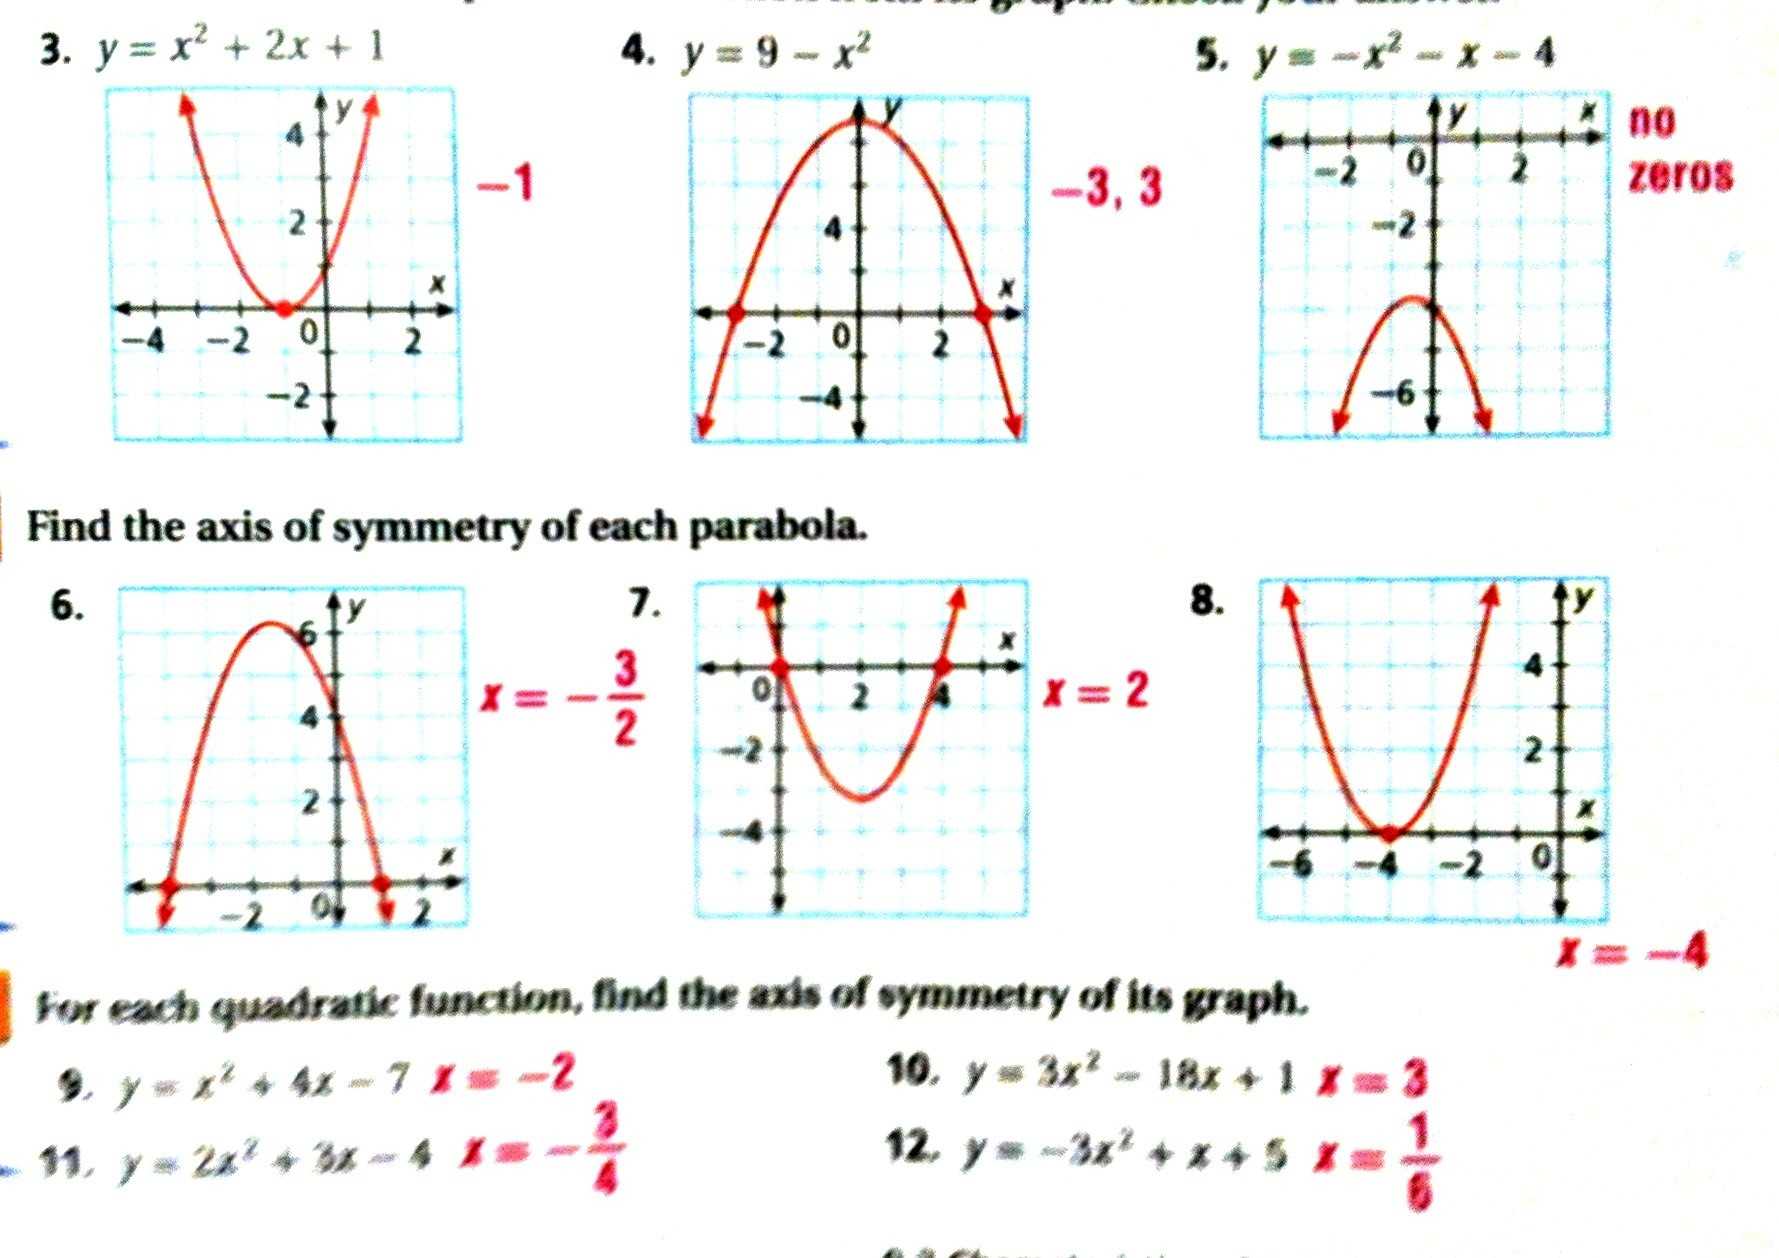 Transformations Of Linear Functions Worksheet Along with Parent Functions and Transformations Worksheet with Answers